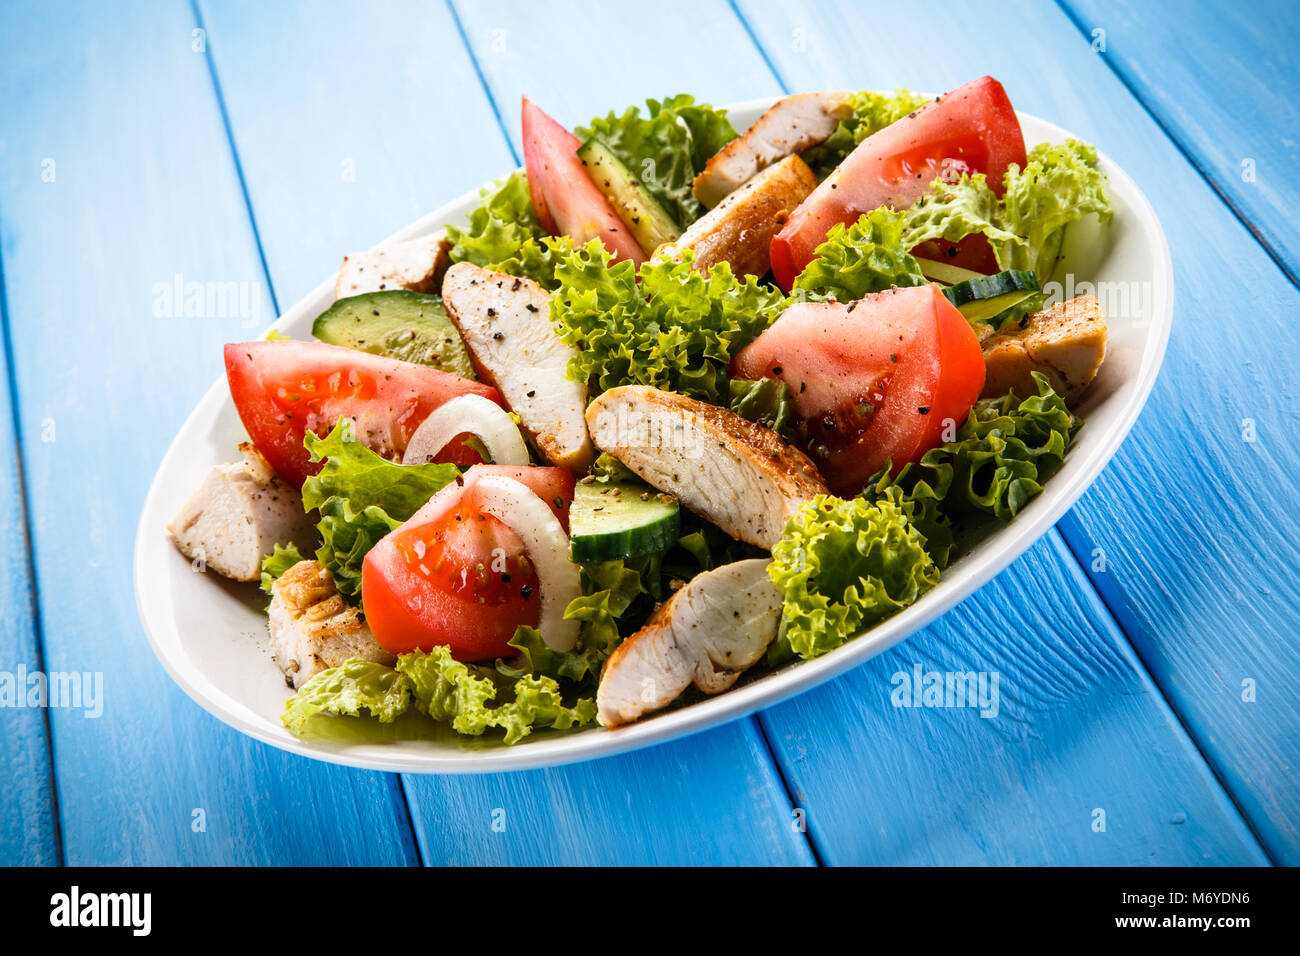 Greek salad with grilled chicken Stock Photo